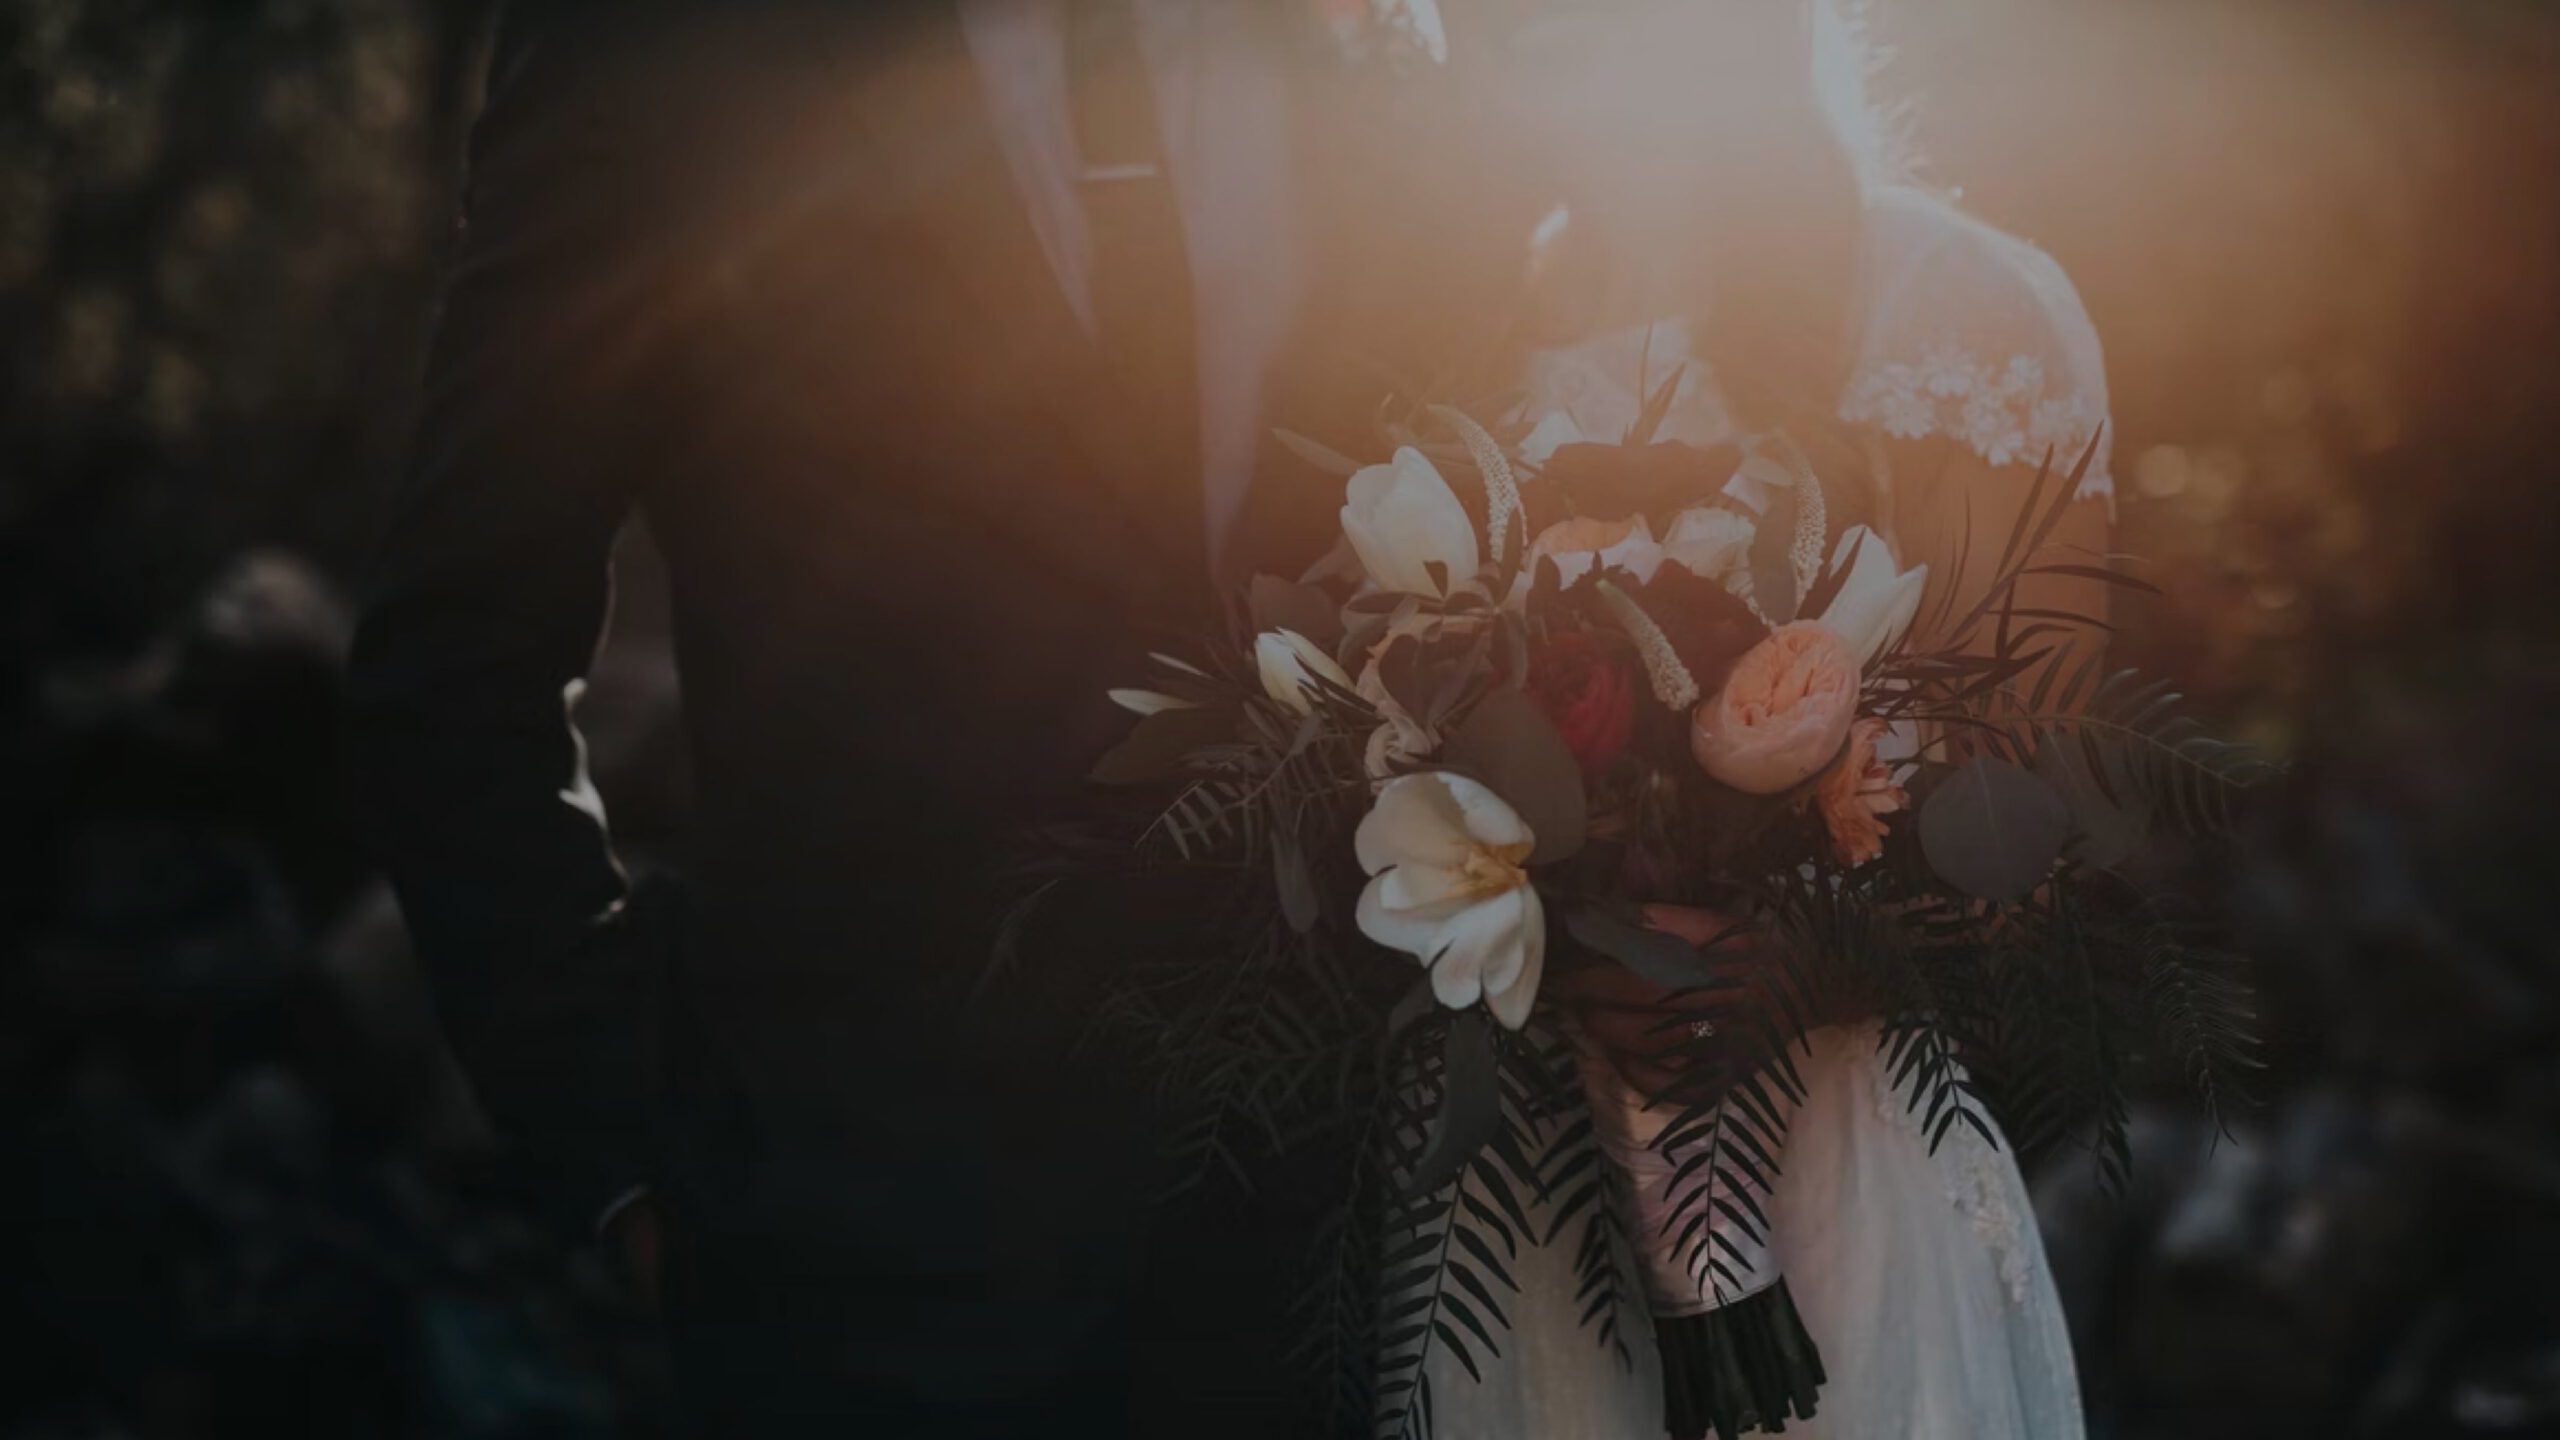 Bride and groom holding a wedding bouquet